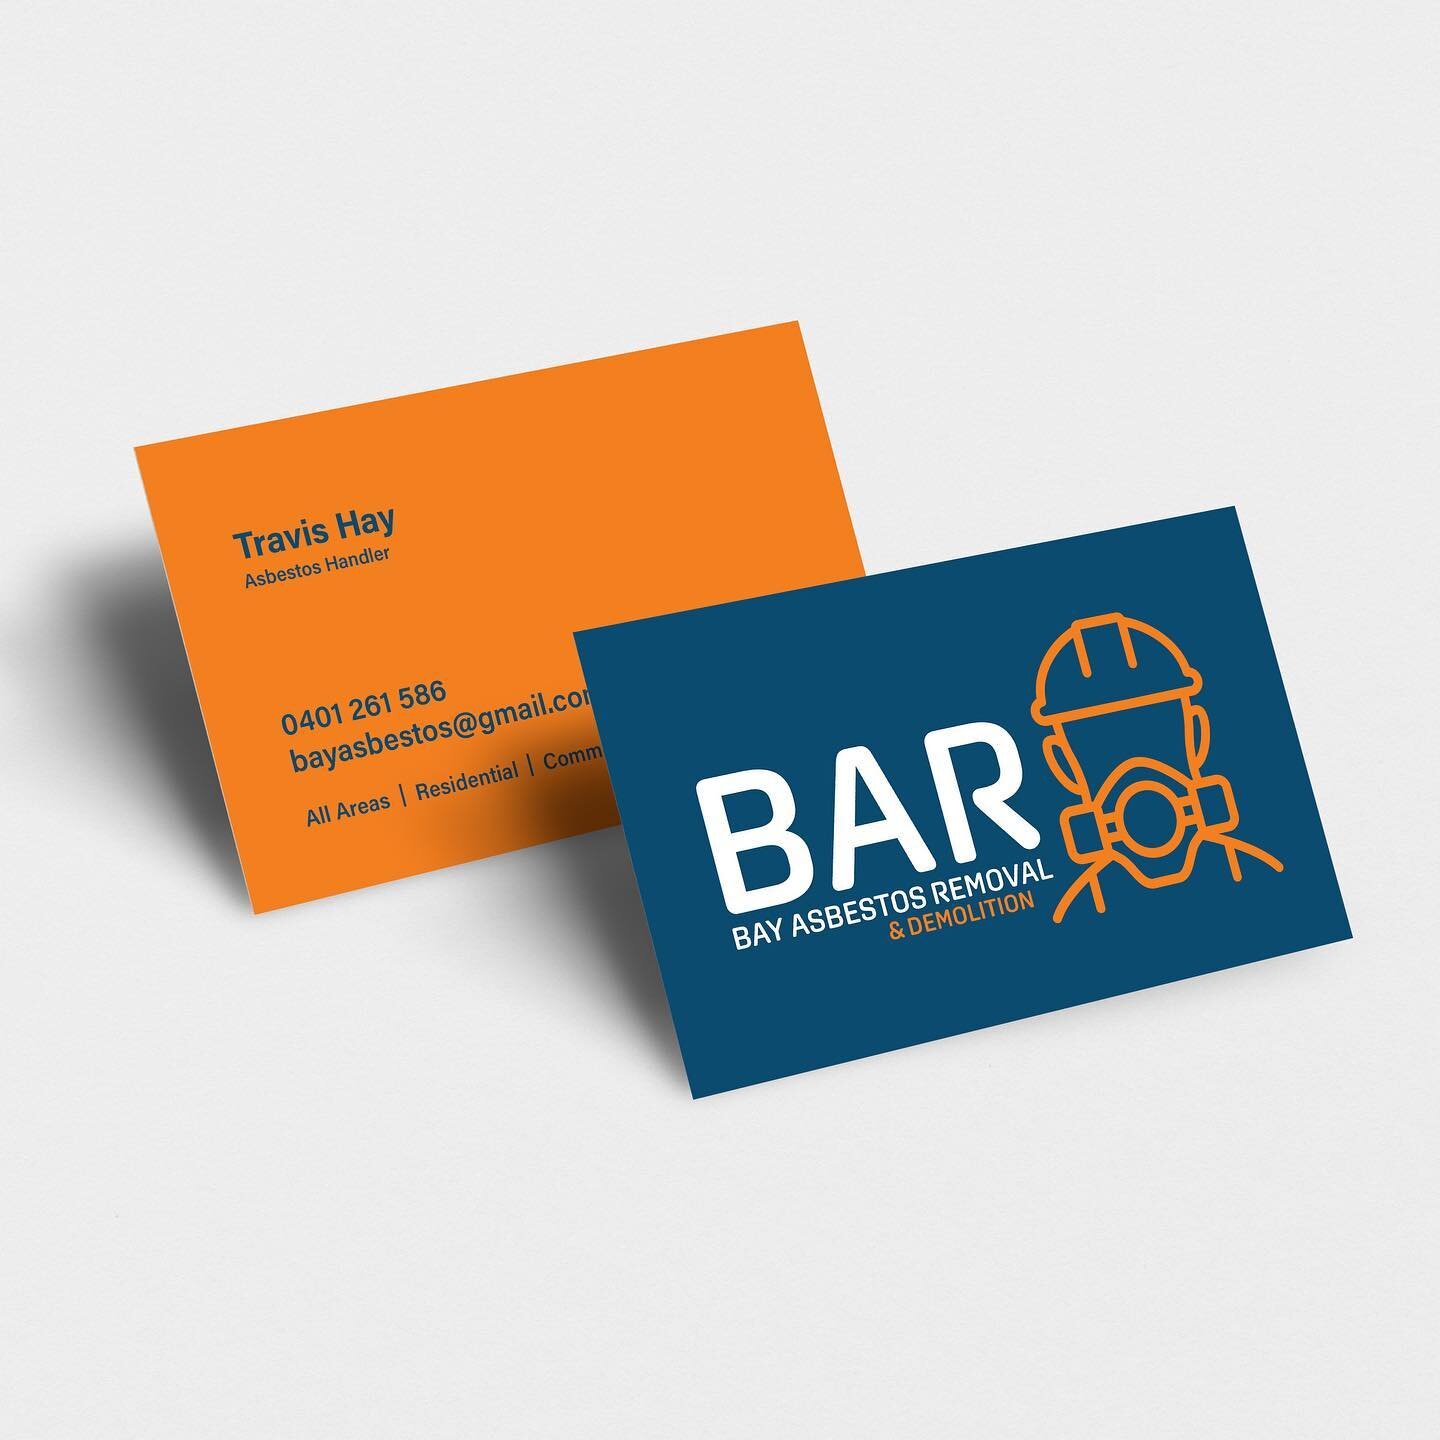 Great working with @bar_bayasbestosremoval on their new logo and branding. Check out there business cards! 
&bull;
&bull;
&bull;
#brandingagency #logodesigners #marketingagency #tradiebranding